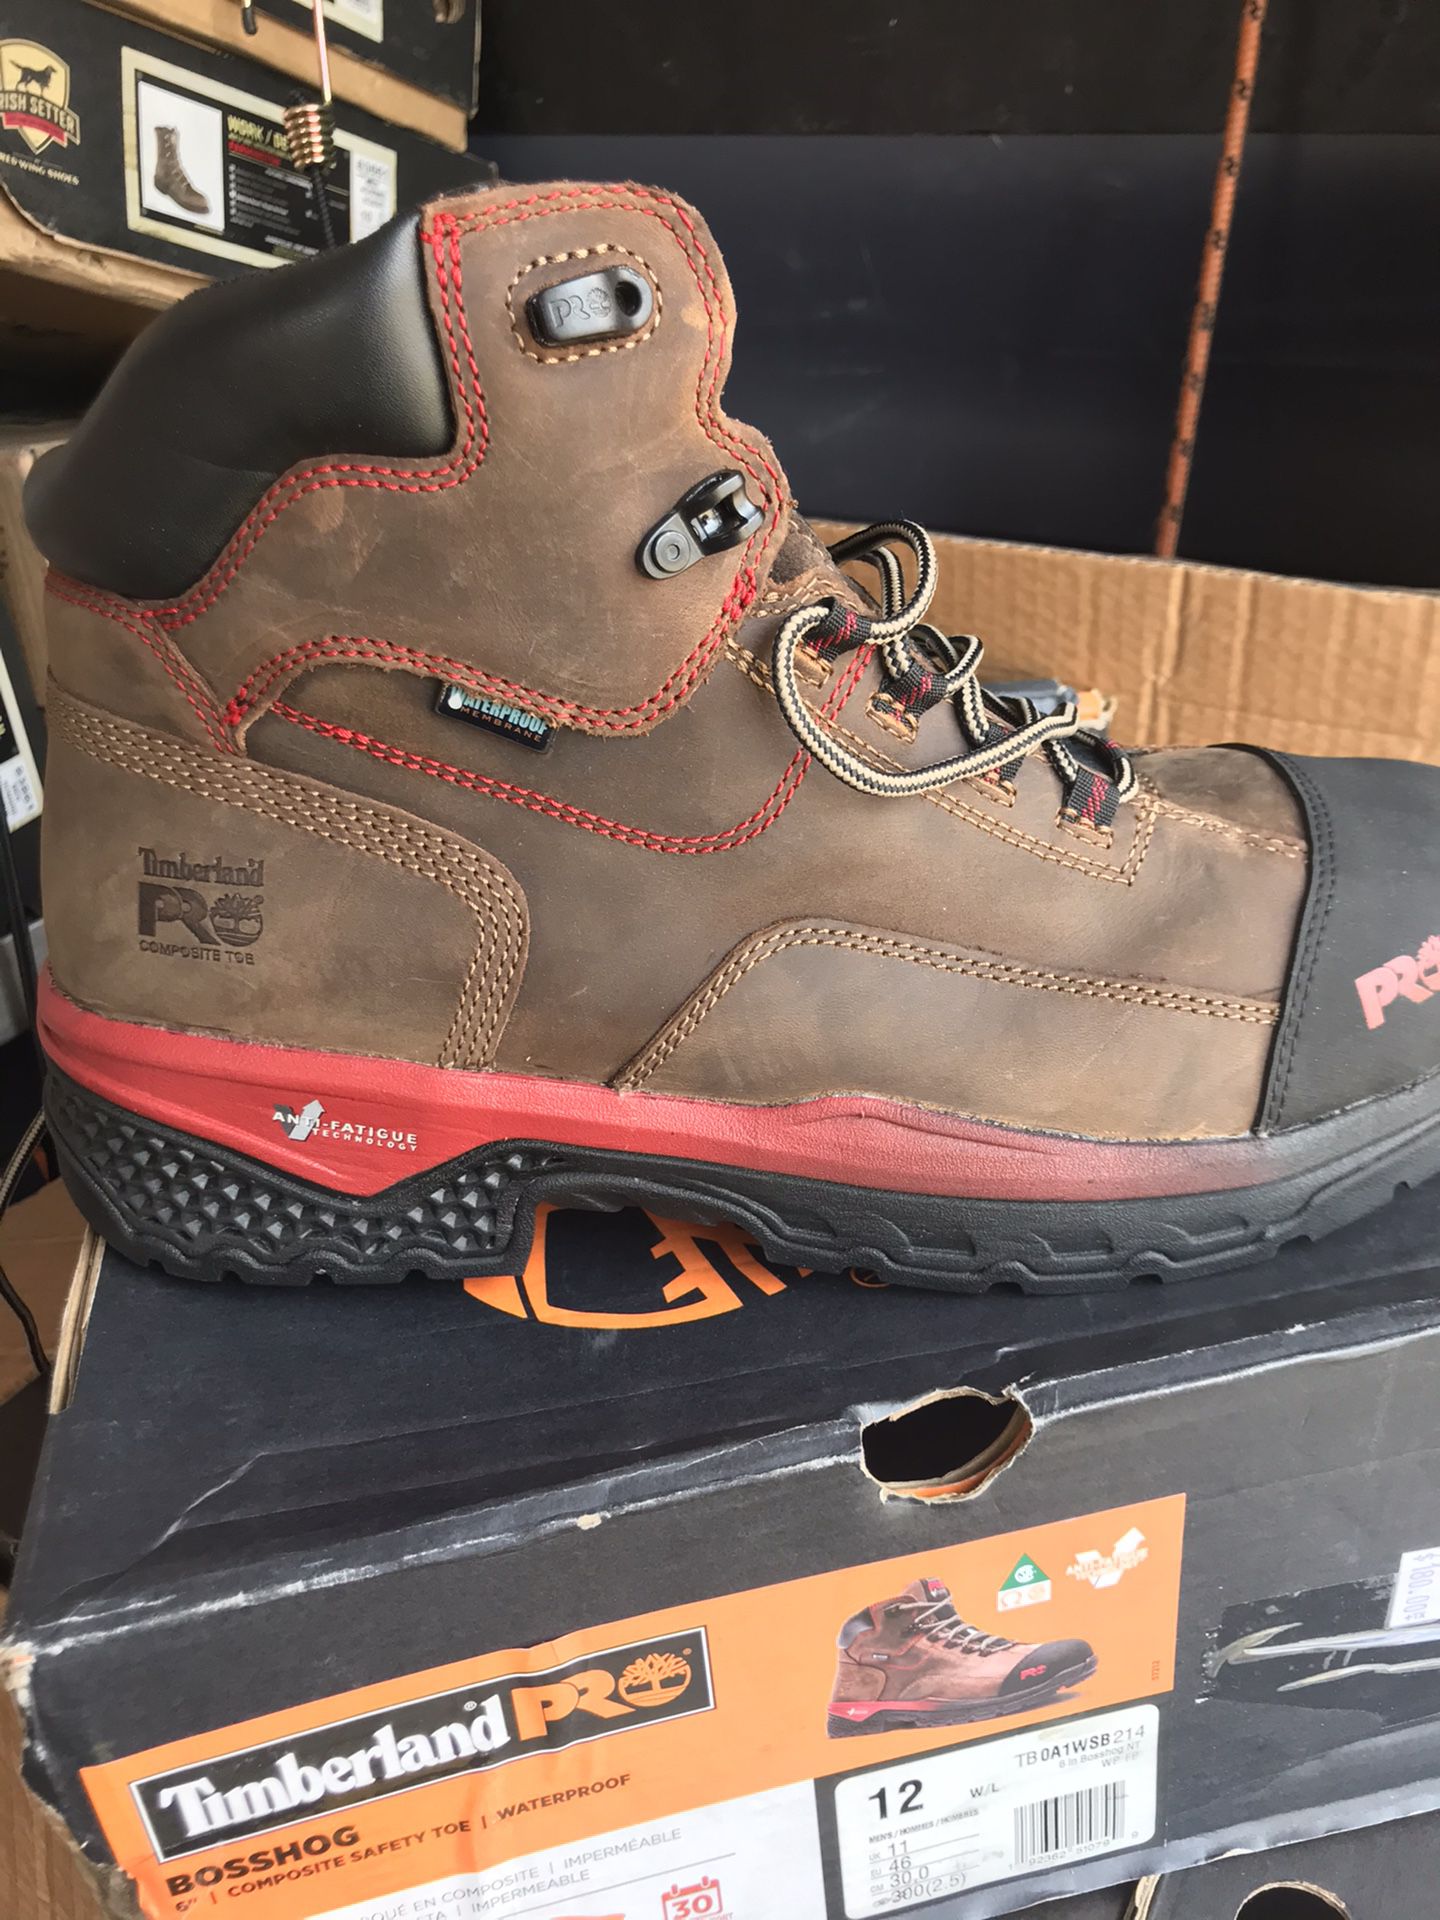 Timberland BOSSHOG//Work boots // composite safety toe// size (12)only